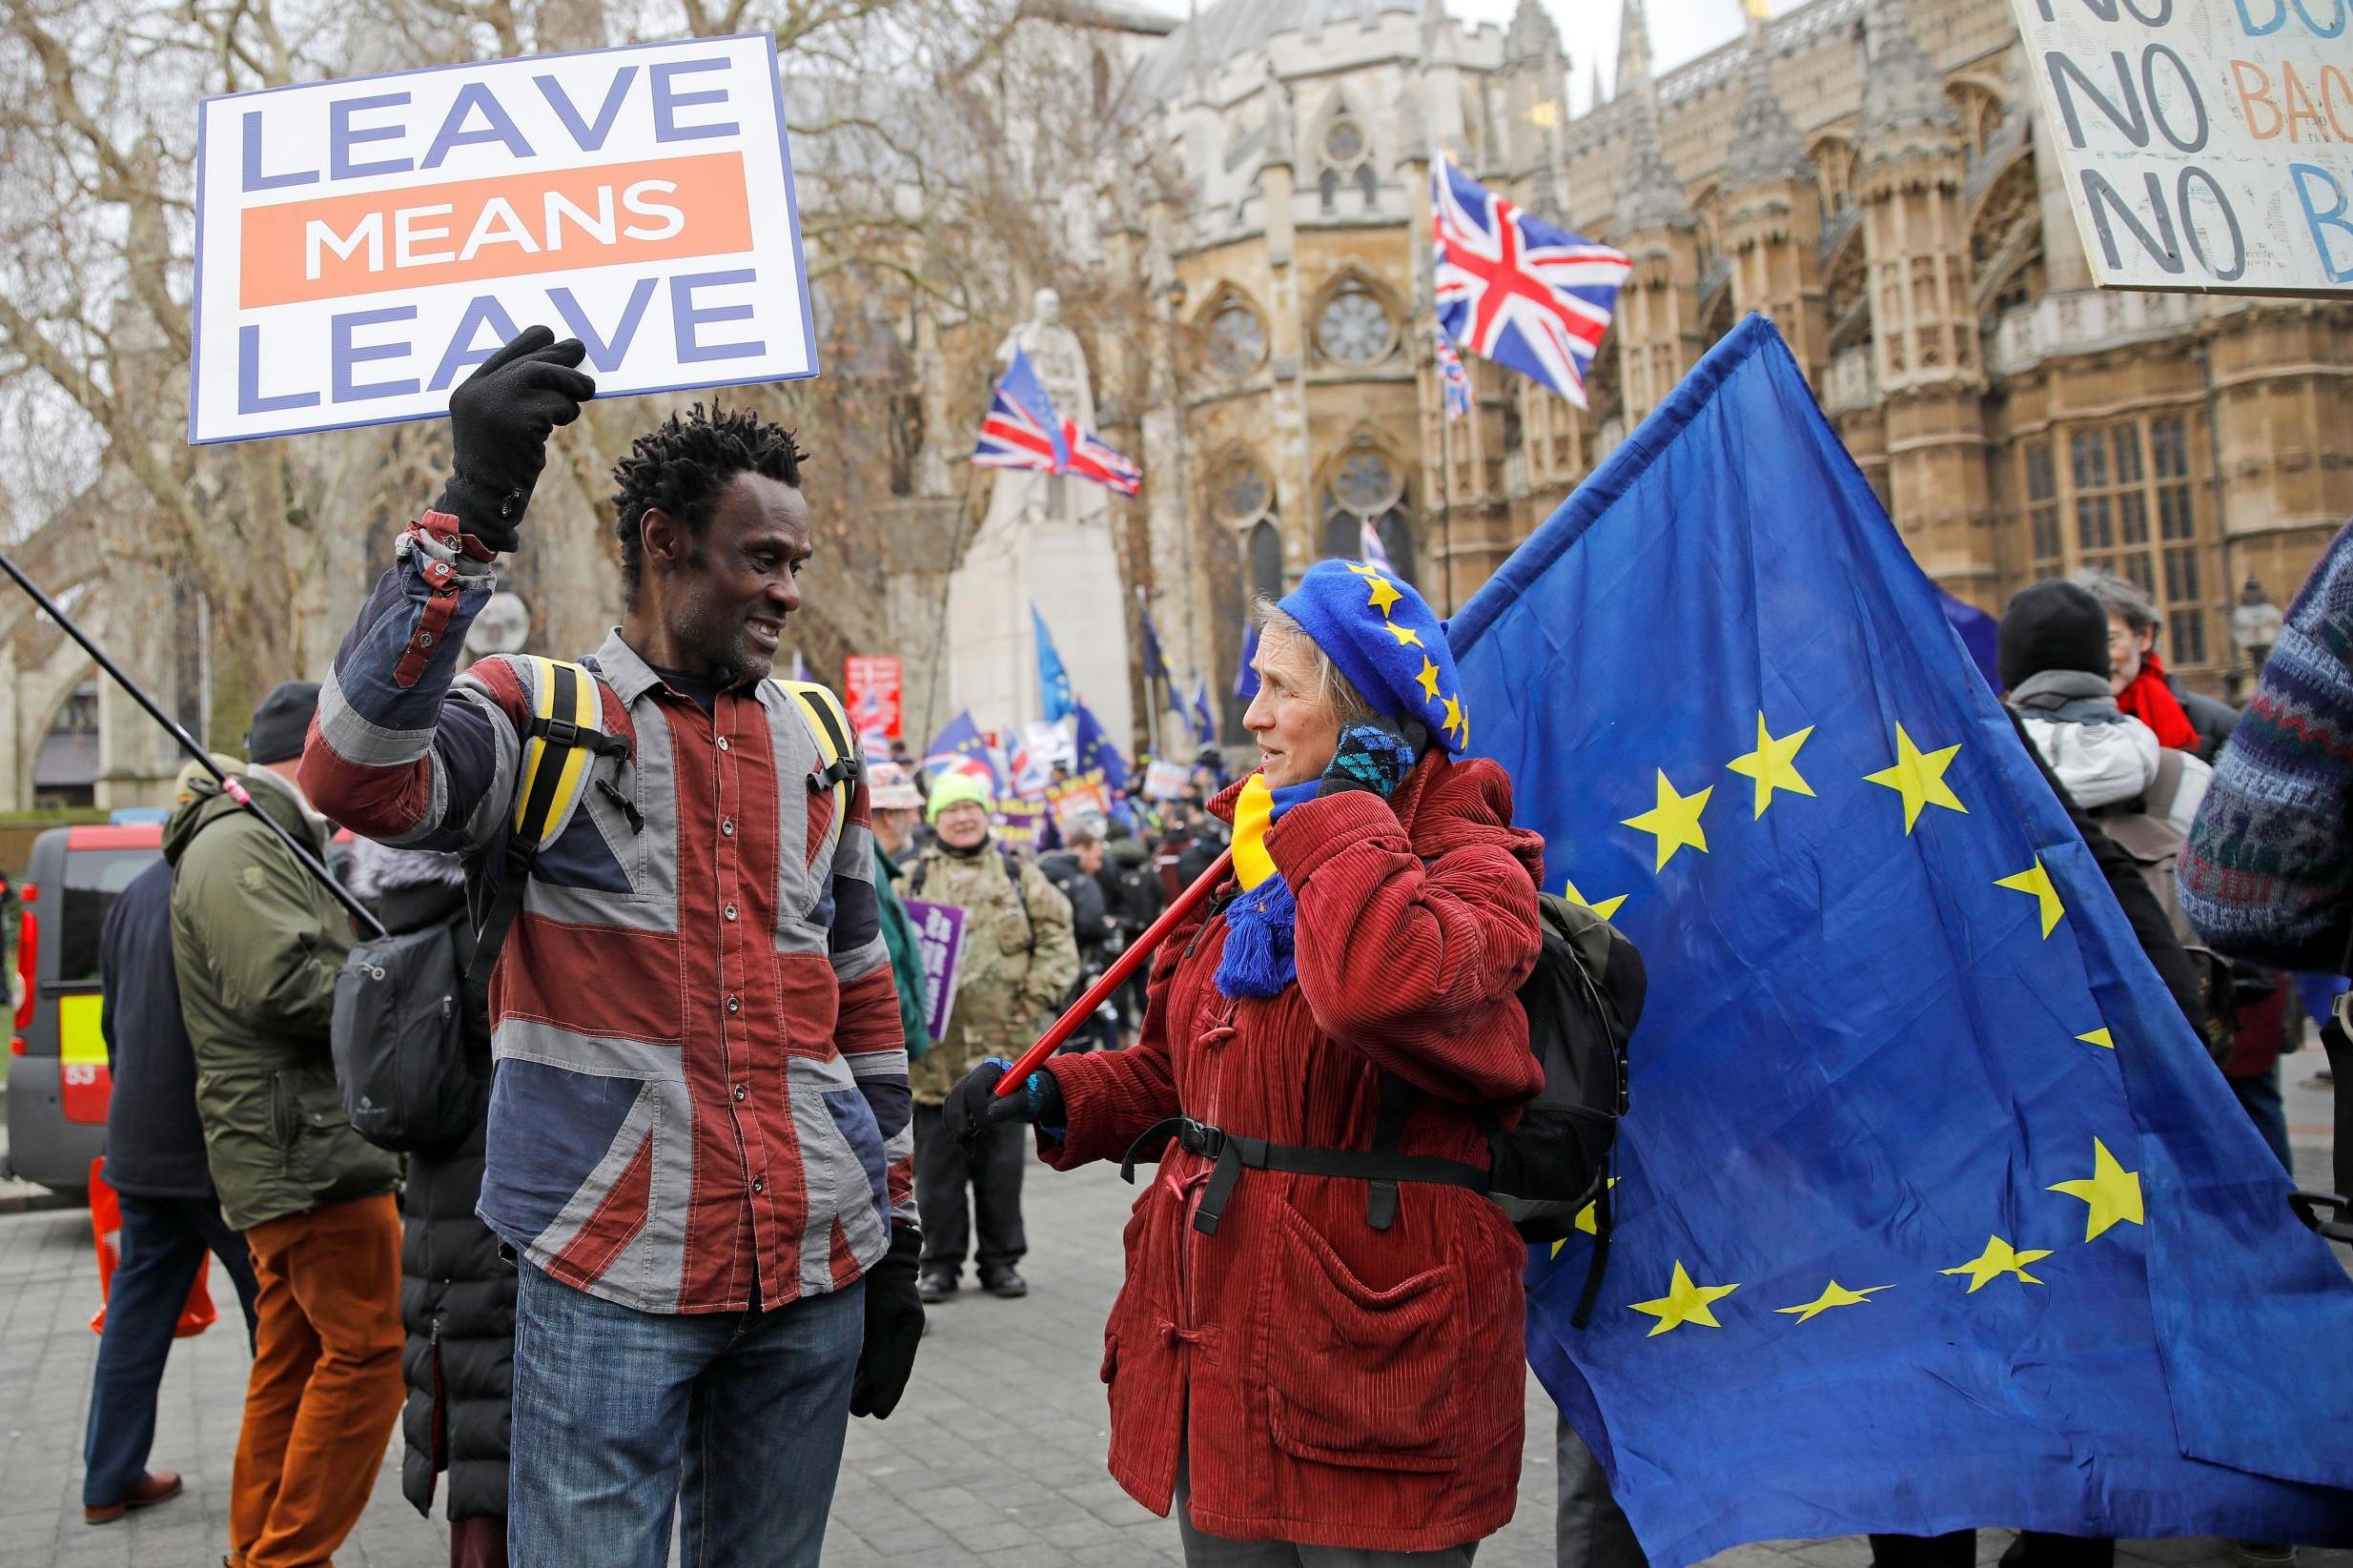 A pro-Brexit activist (left) talks with an anti-Brexit demonstrator as they protest near the Houses of Parliament (AFP/Getty)